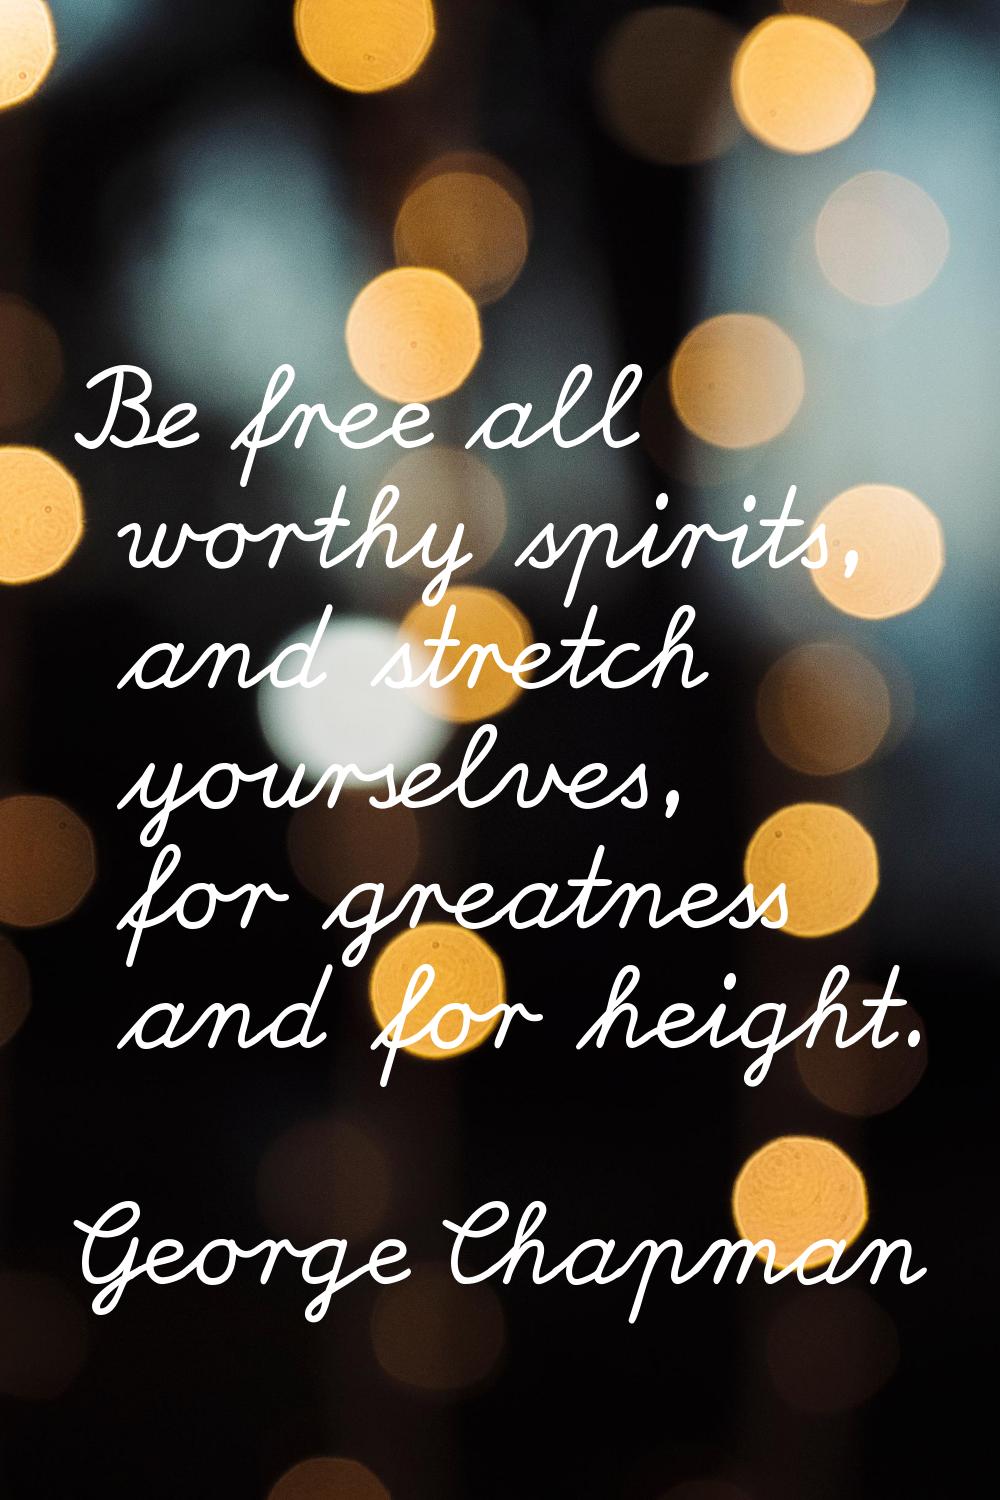 Be free all worthy spirits, and stretch yourselves, for greatness and for height.